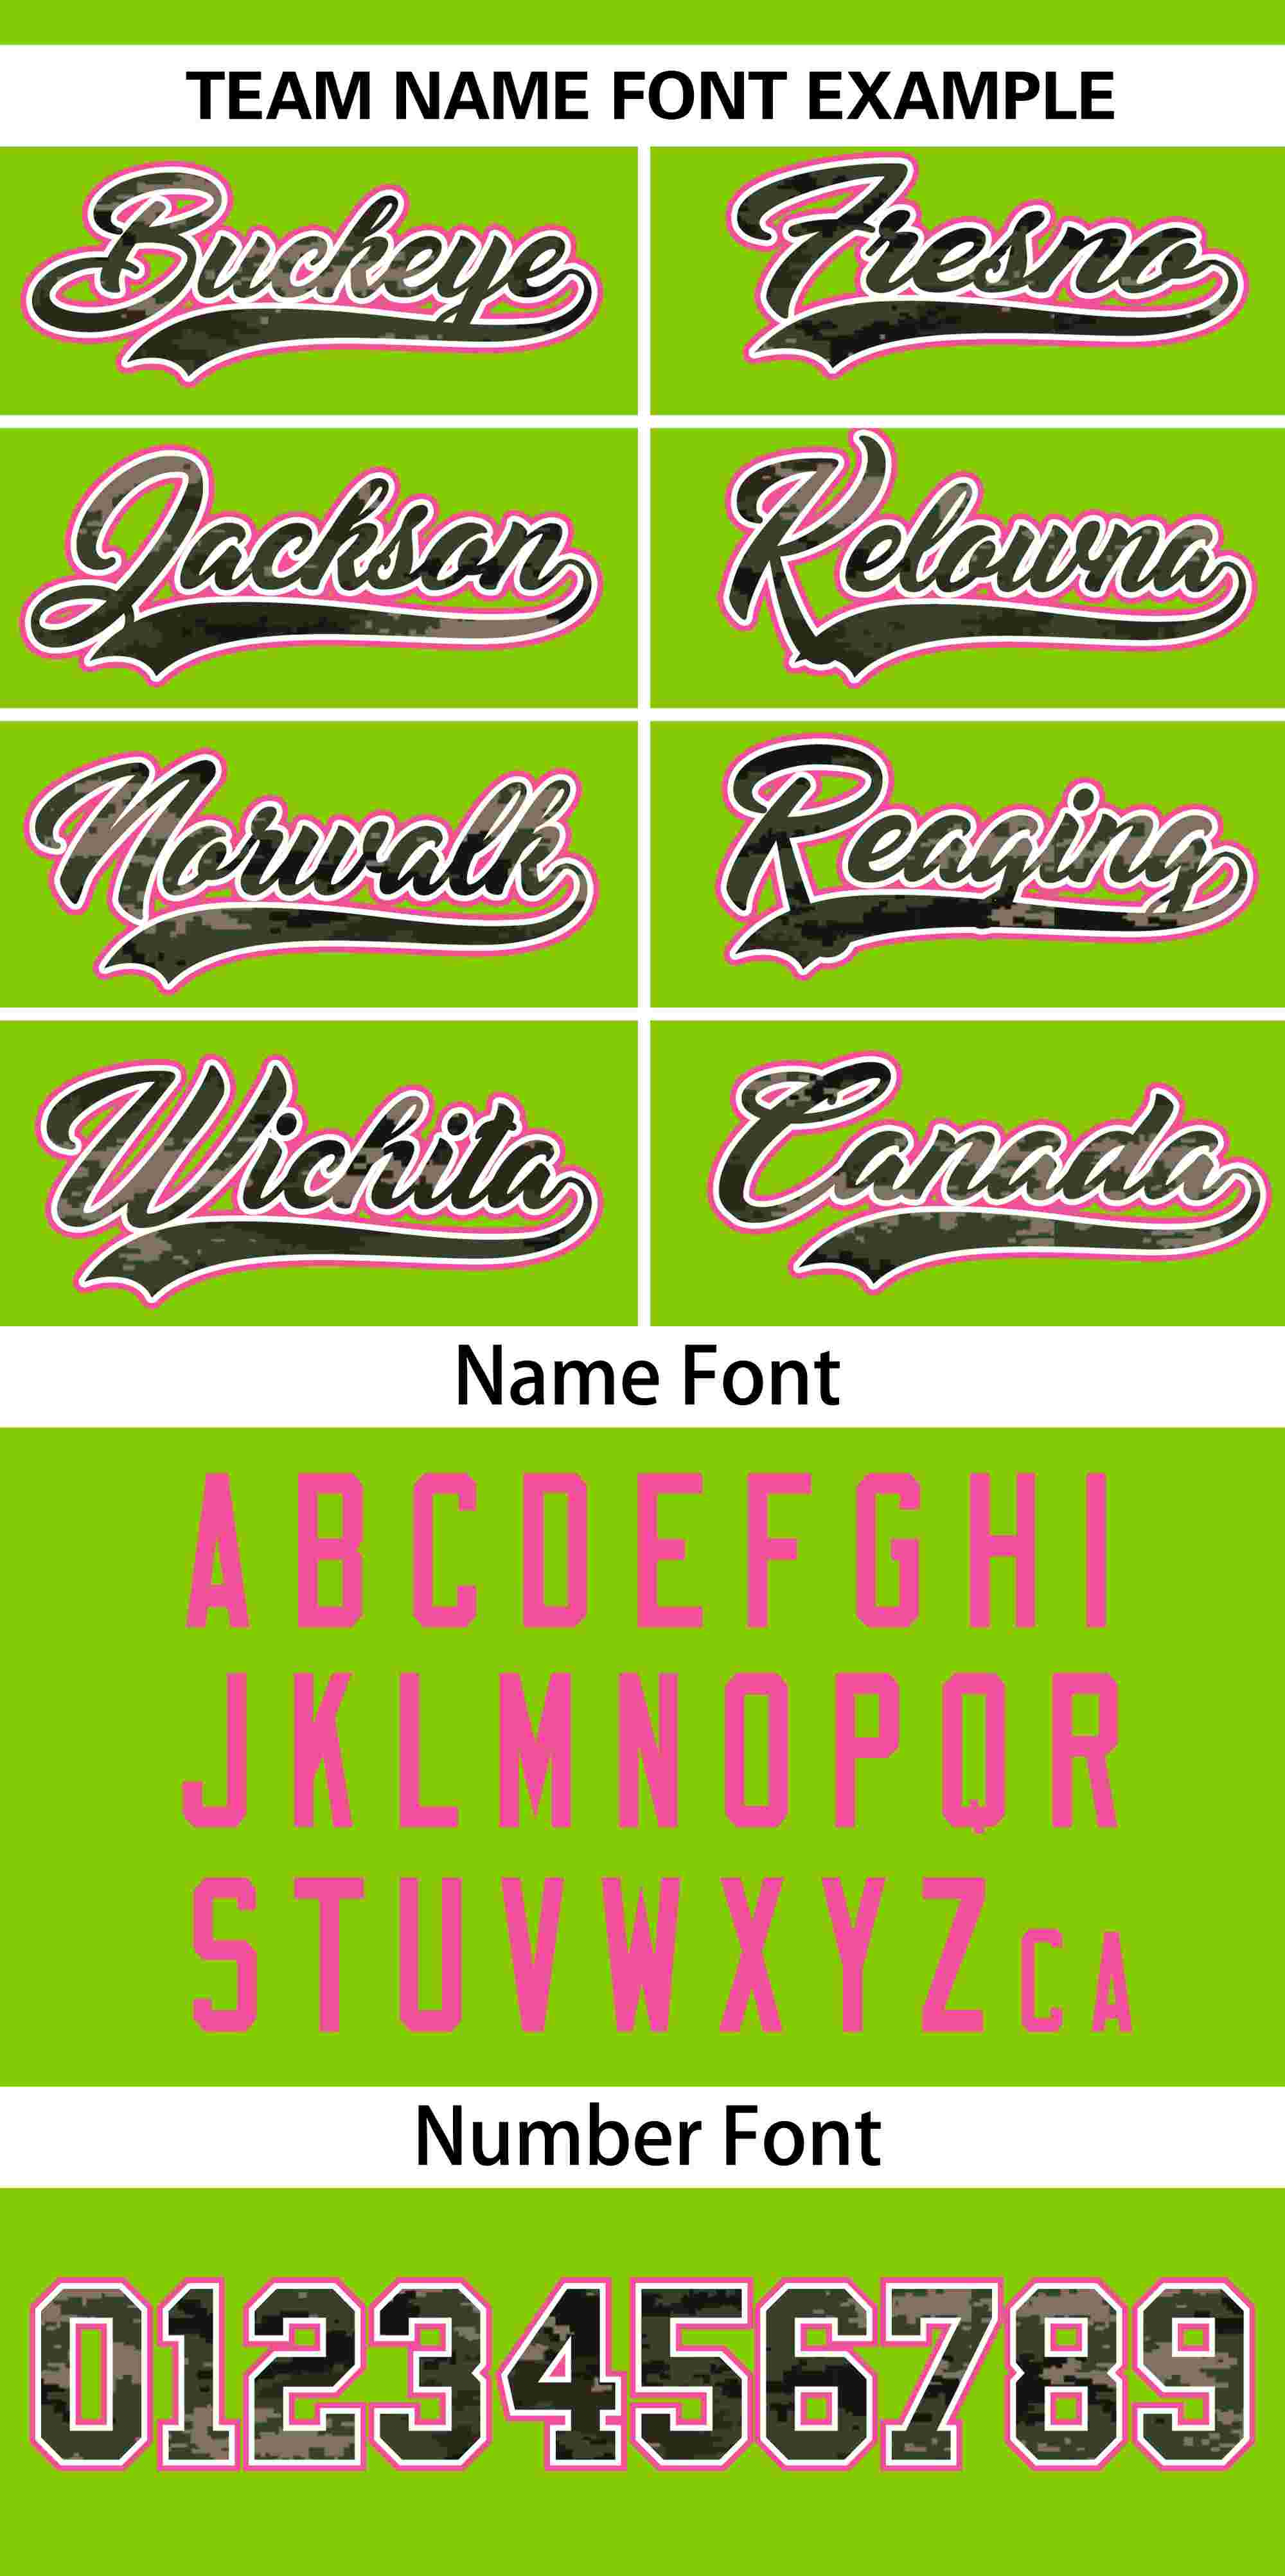 Custom Neon Green Personalized Camo Font Authentic Baseball Jersey